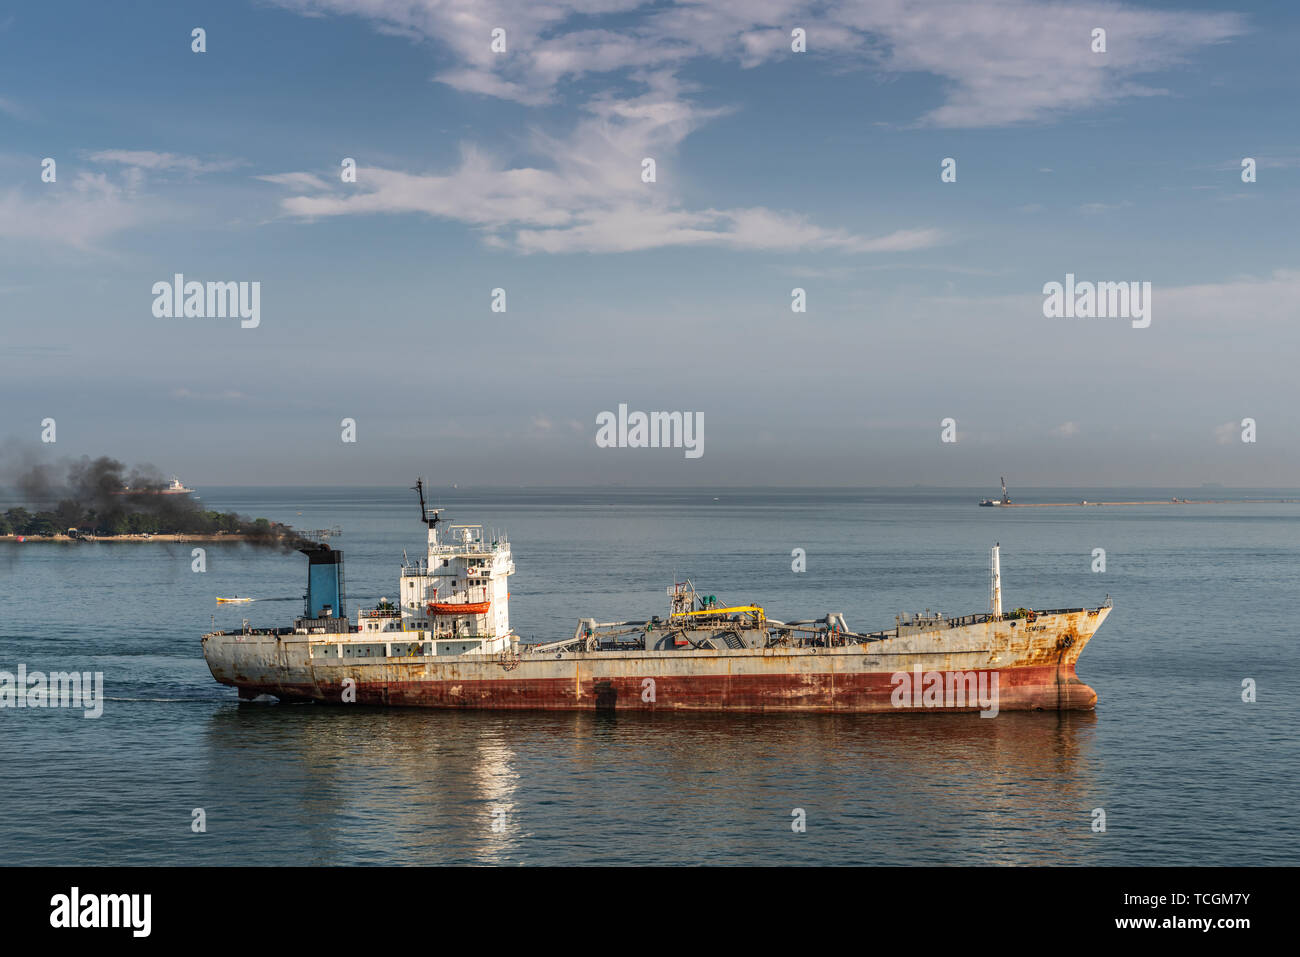 Makassar, Sulawesi, Indonesia - February 28, 2019: Rusty cement carrier Cemcon ship sails into port exhausting black smoke. Blue sea and sky. Stock Photo